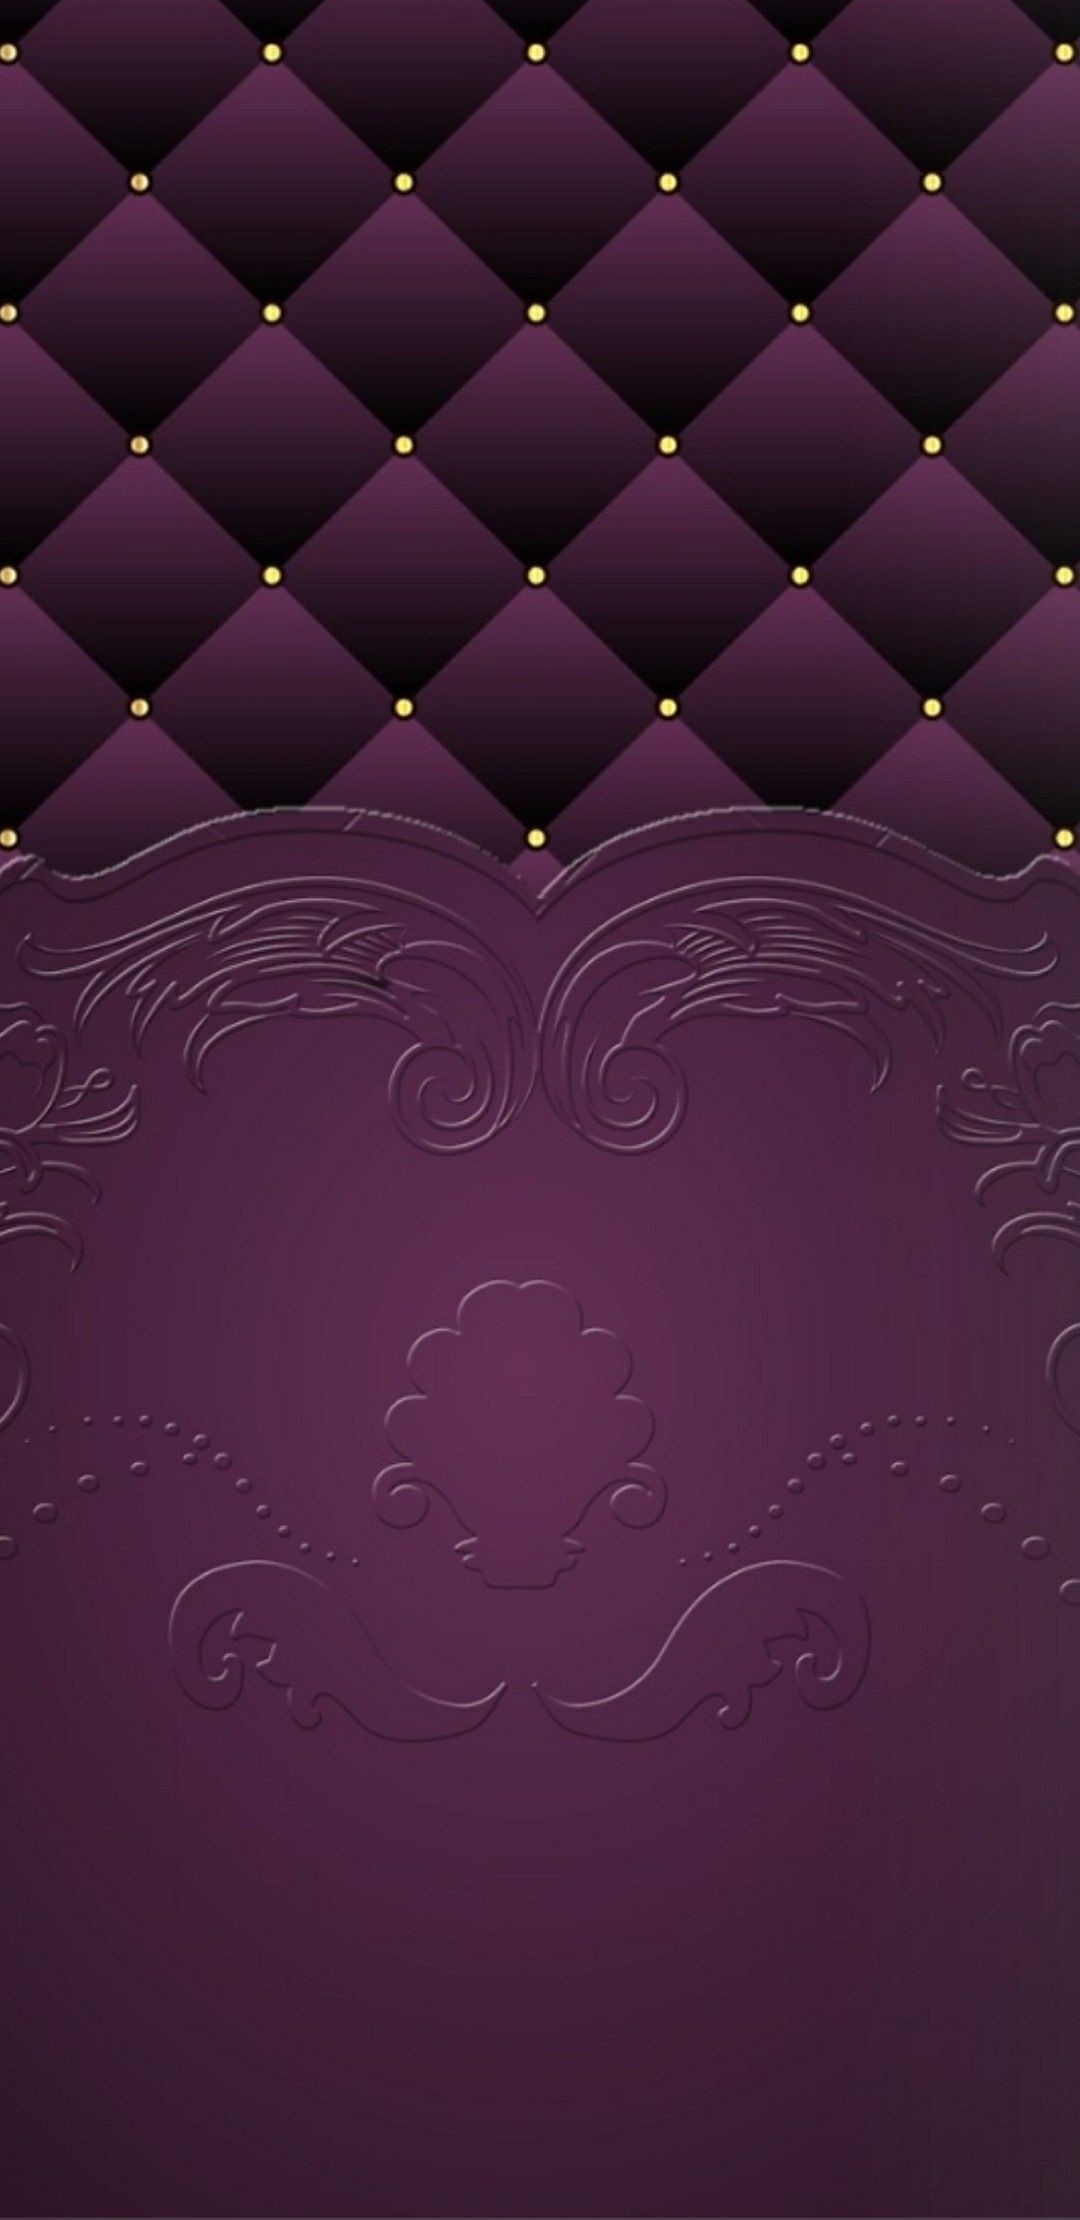 1080x2220 Cell phone cover Wallpaper Iphone Neon, Bling Wallpaper, Gothic Wallpaper, Purple  Wallpaper,